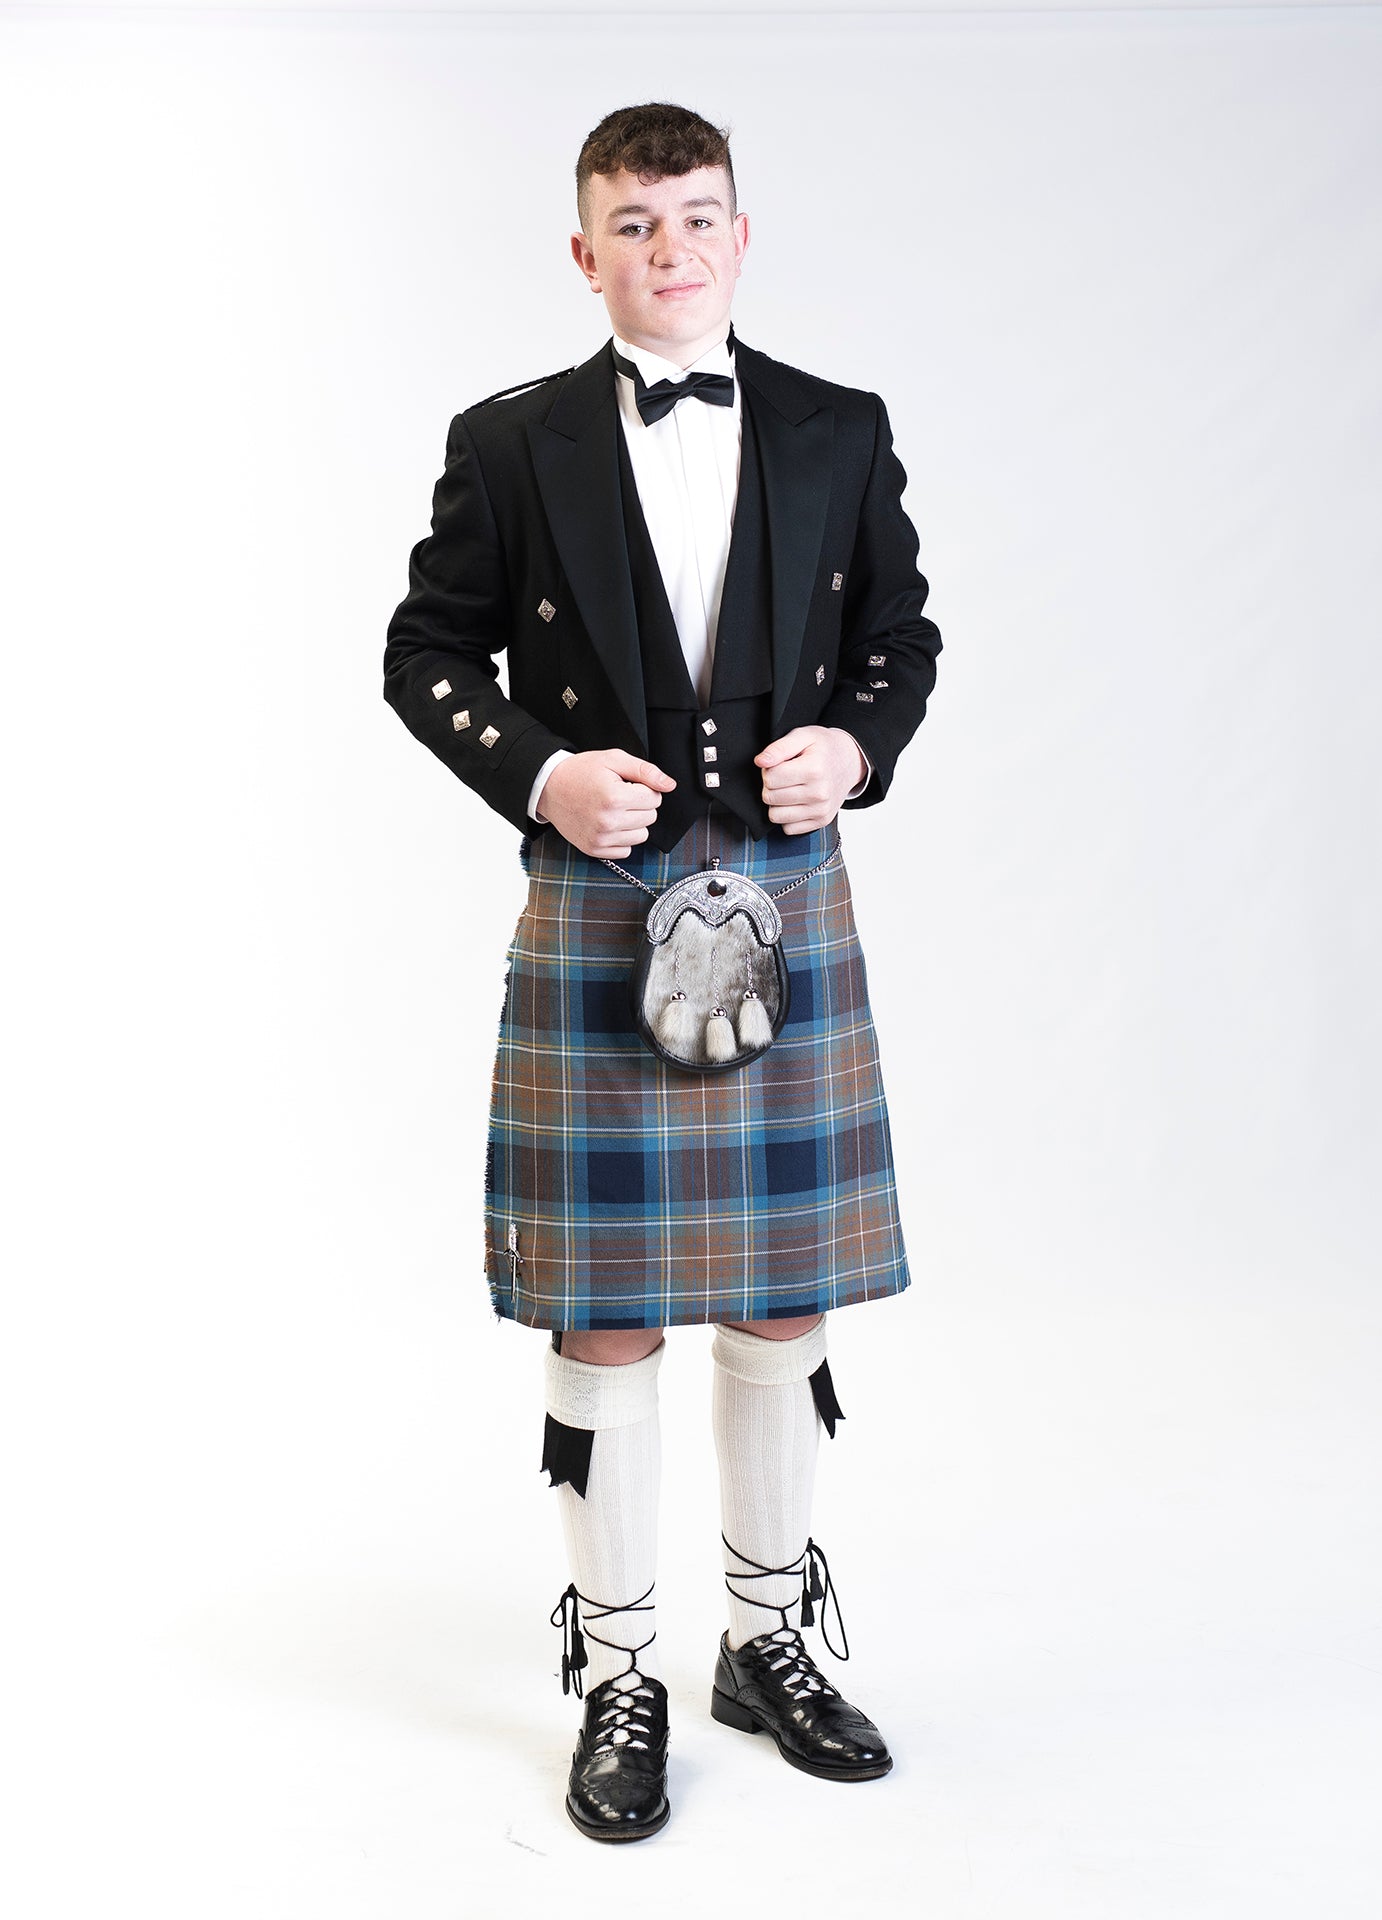 Holyrood / Prince Charlie Hire Outfit